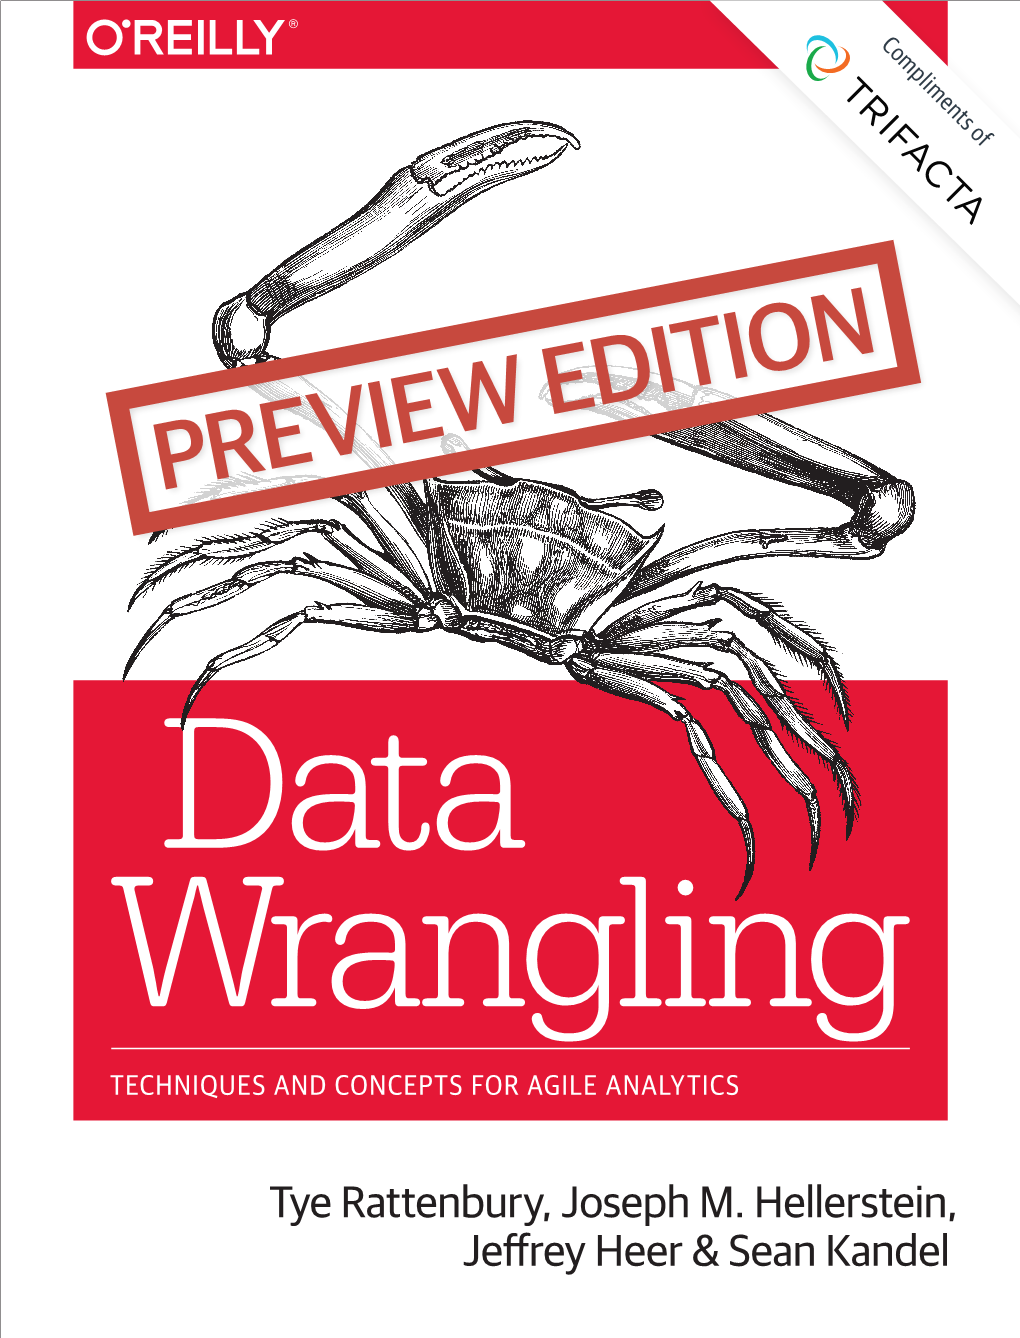 Data Wrangling Techniques and Concepts for Agile Analytics